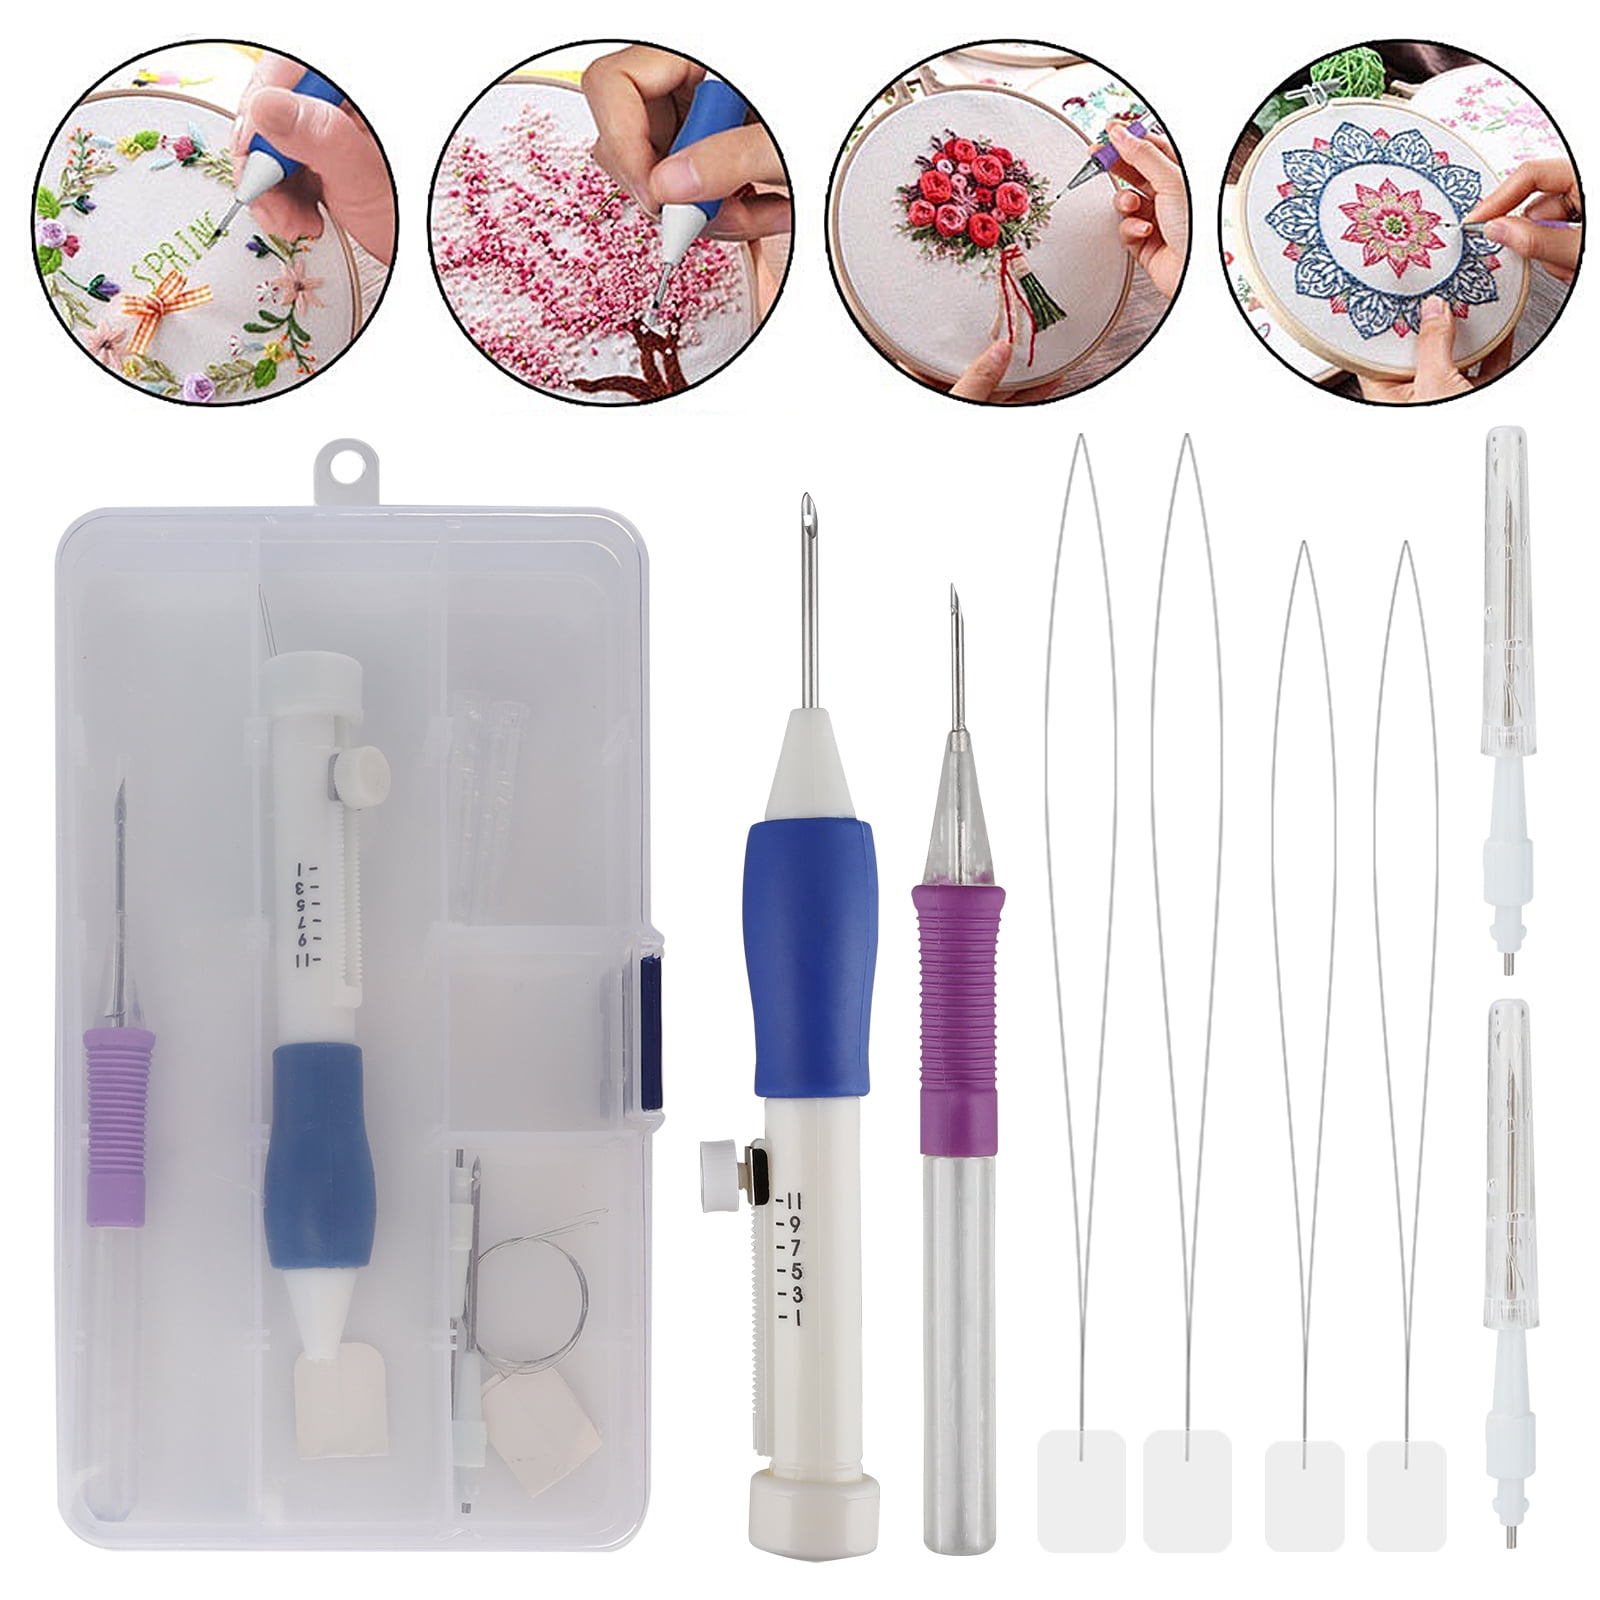 TSV Magic Embroidery Pen Kit, Embroidery Punch Needle Pen Set, with  Adjustable Embroidery Pen, Extra Punch Needle, 4 Threaders, 3 Sizes  Needles, for Home DIY Embroidery Sewing Crafts, Pillows 